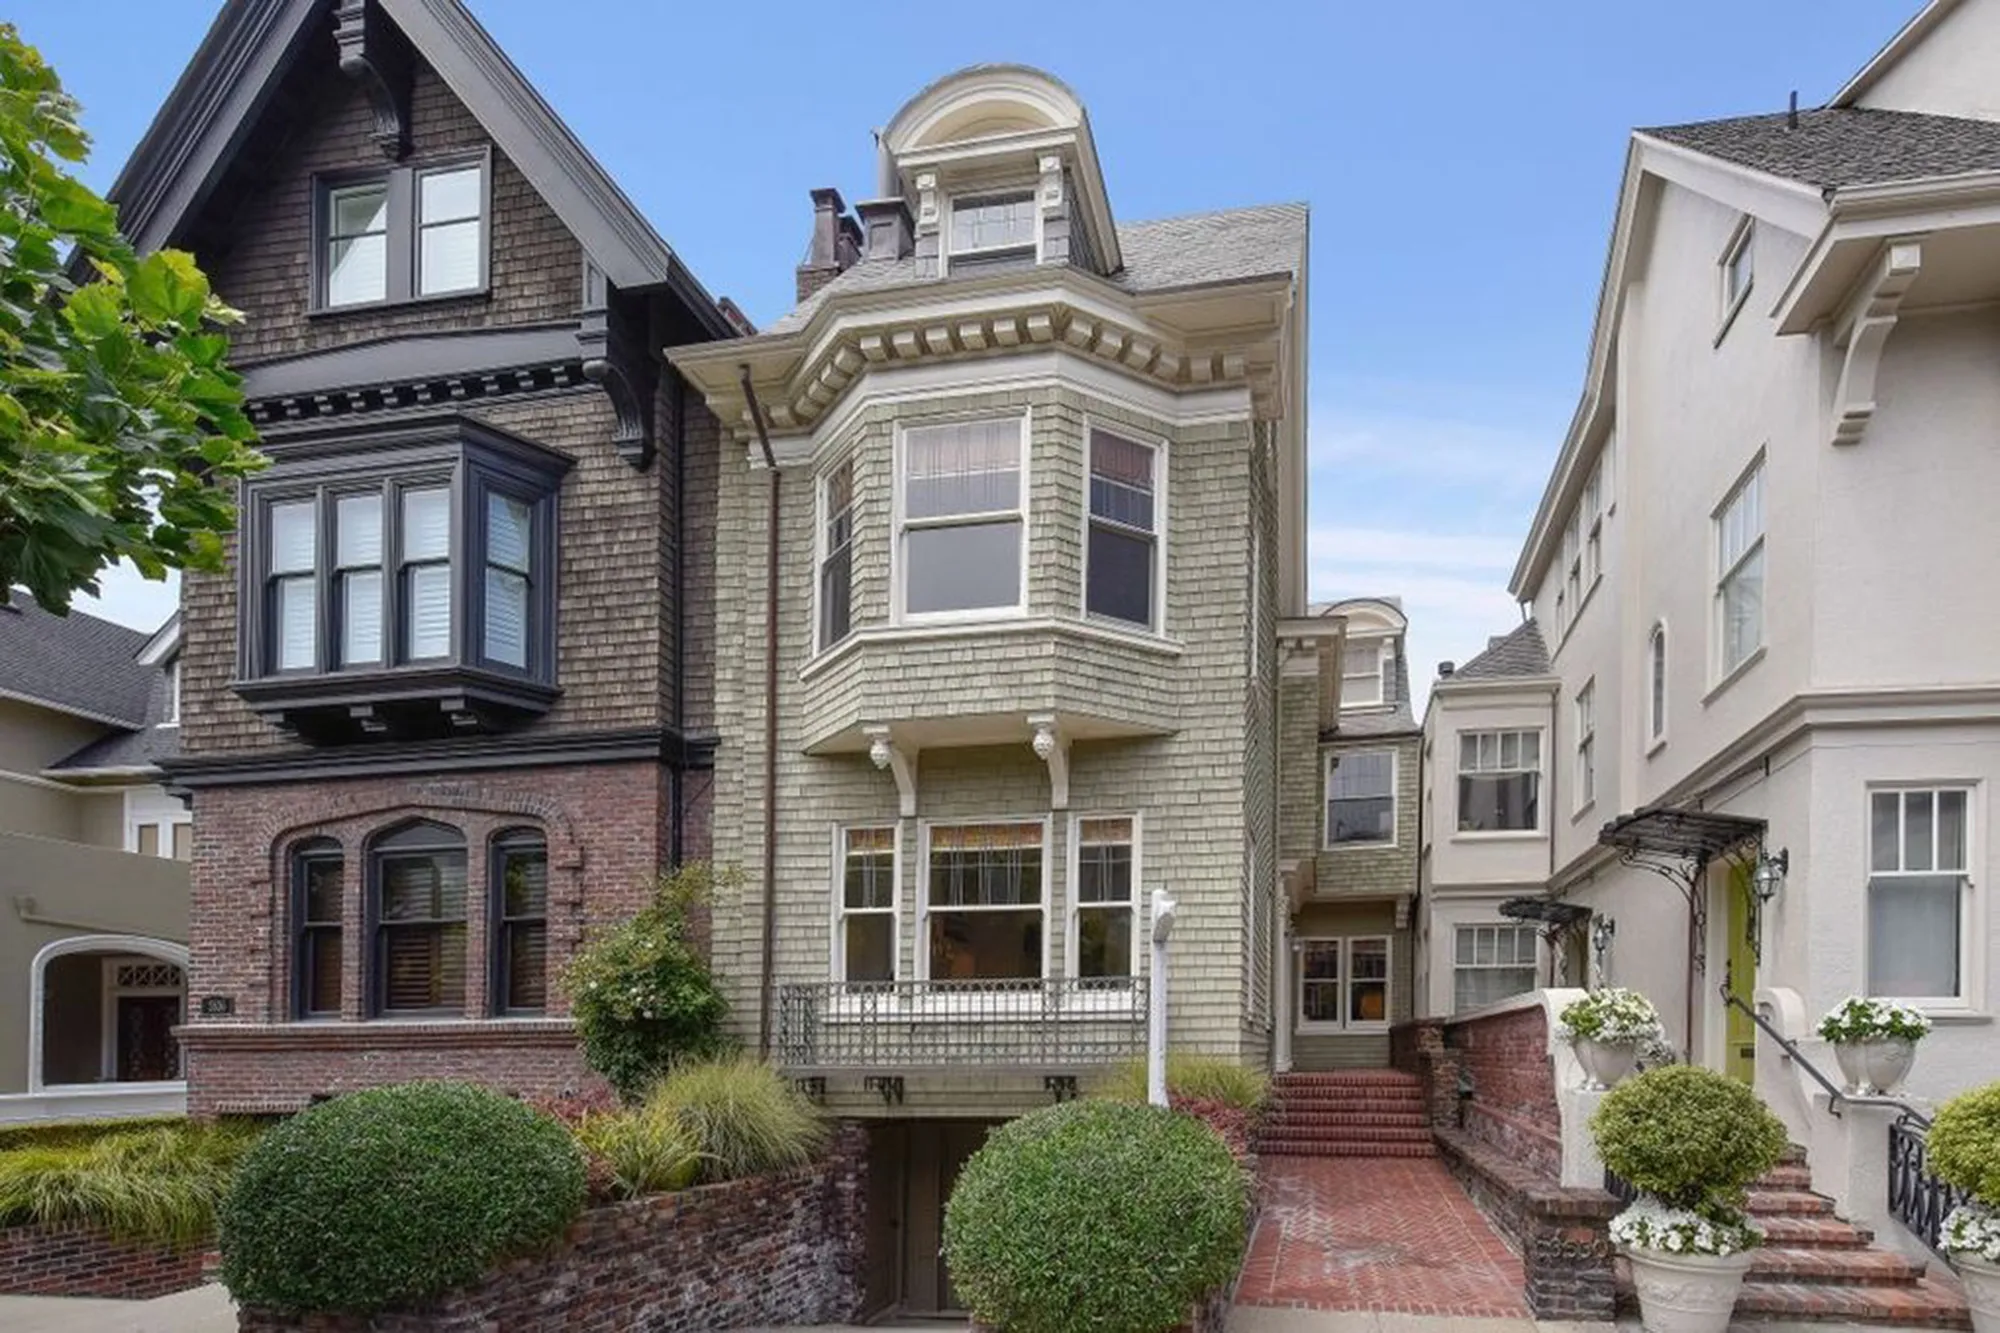 Julia Roberts Is Selling Scenic San Francisco Home